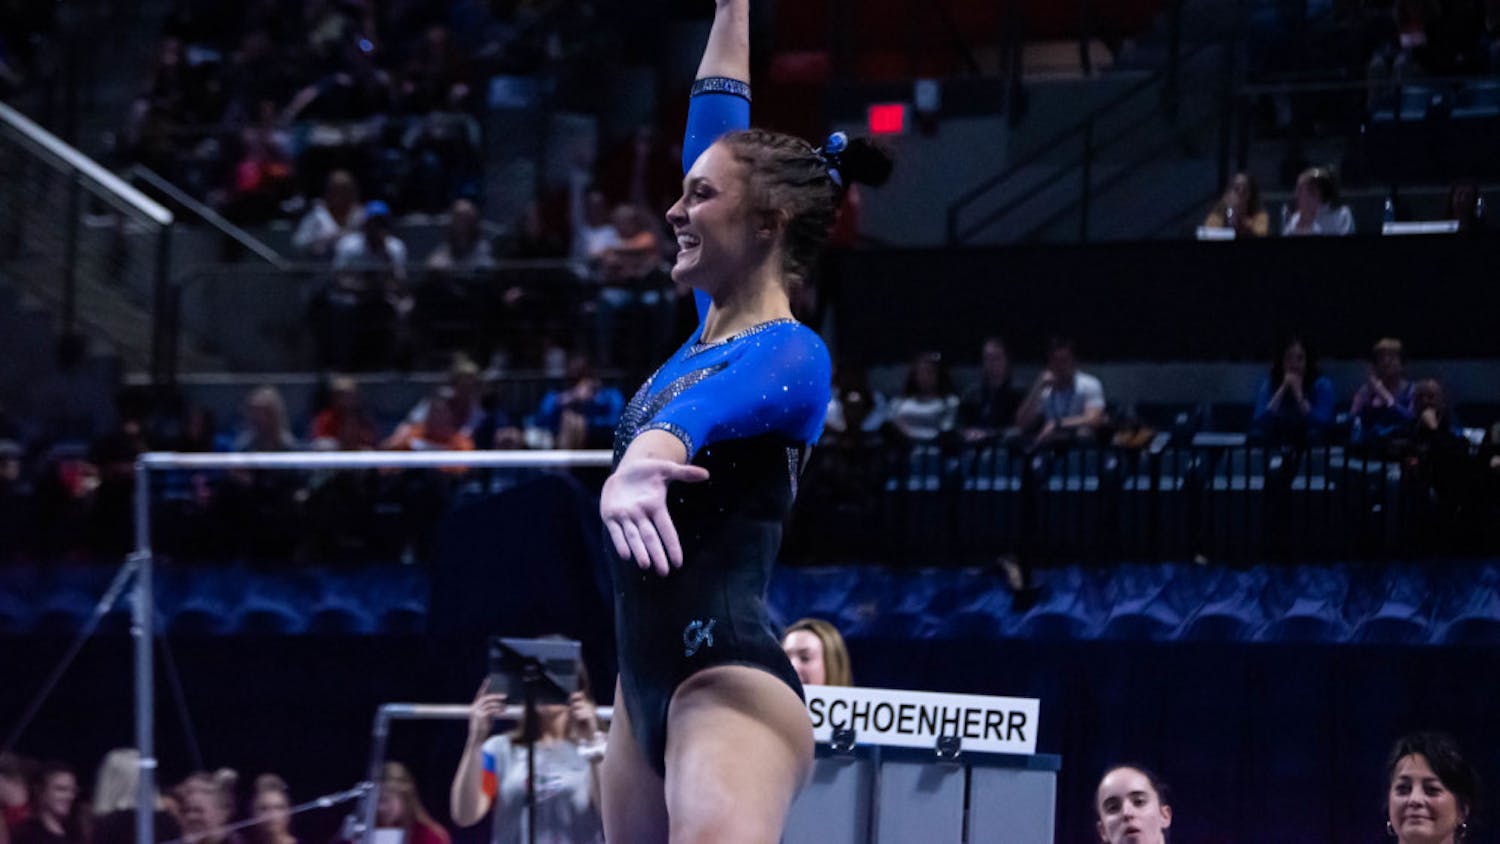 Florida&#x27;s Savannah Schoenherr discussed her team&#x27;s emphasis on staying calm ahead of a blockbuster showdown against No. 2 LSU on Friday